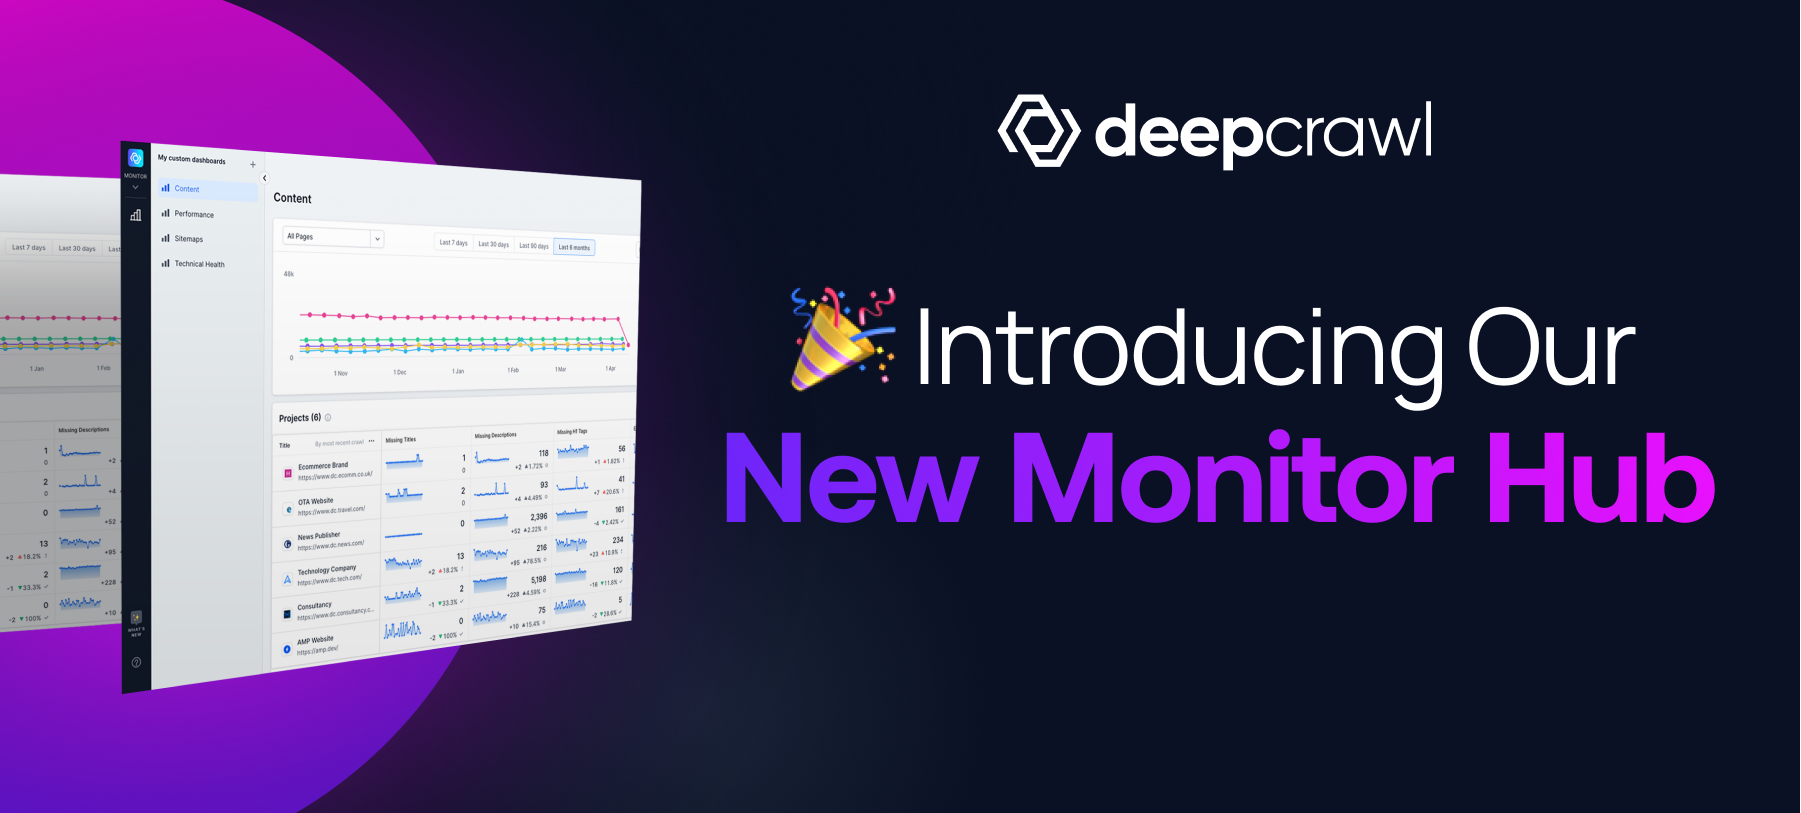 Deepcrawl's newest technical SEO solution for enterprise websites and agencies - Monitor Hub